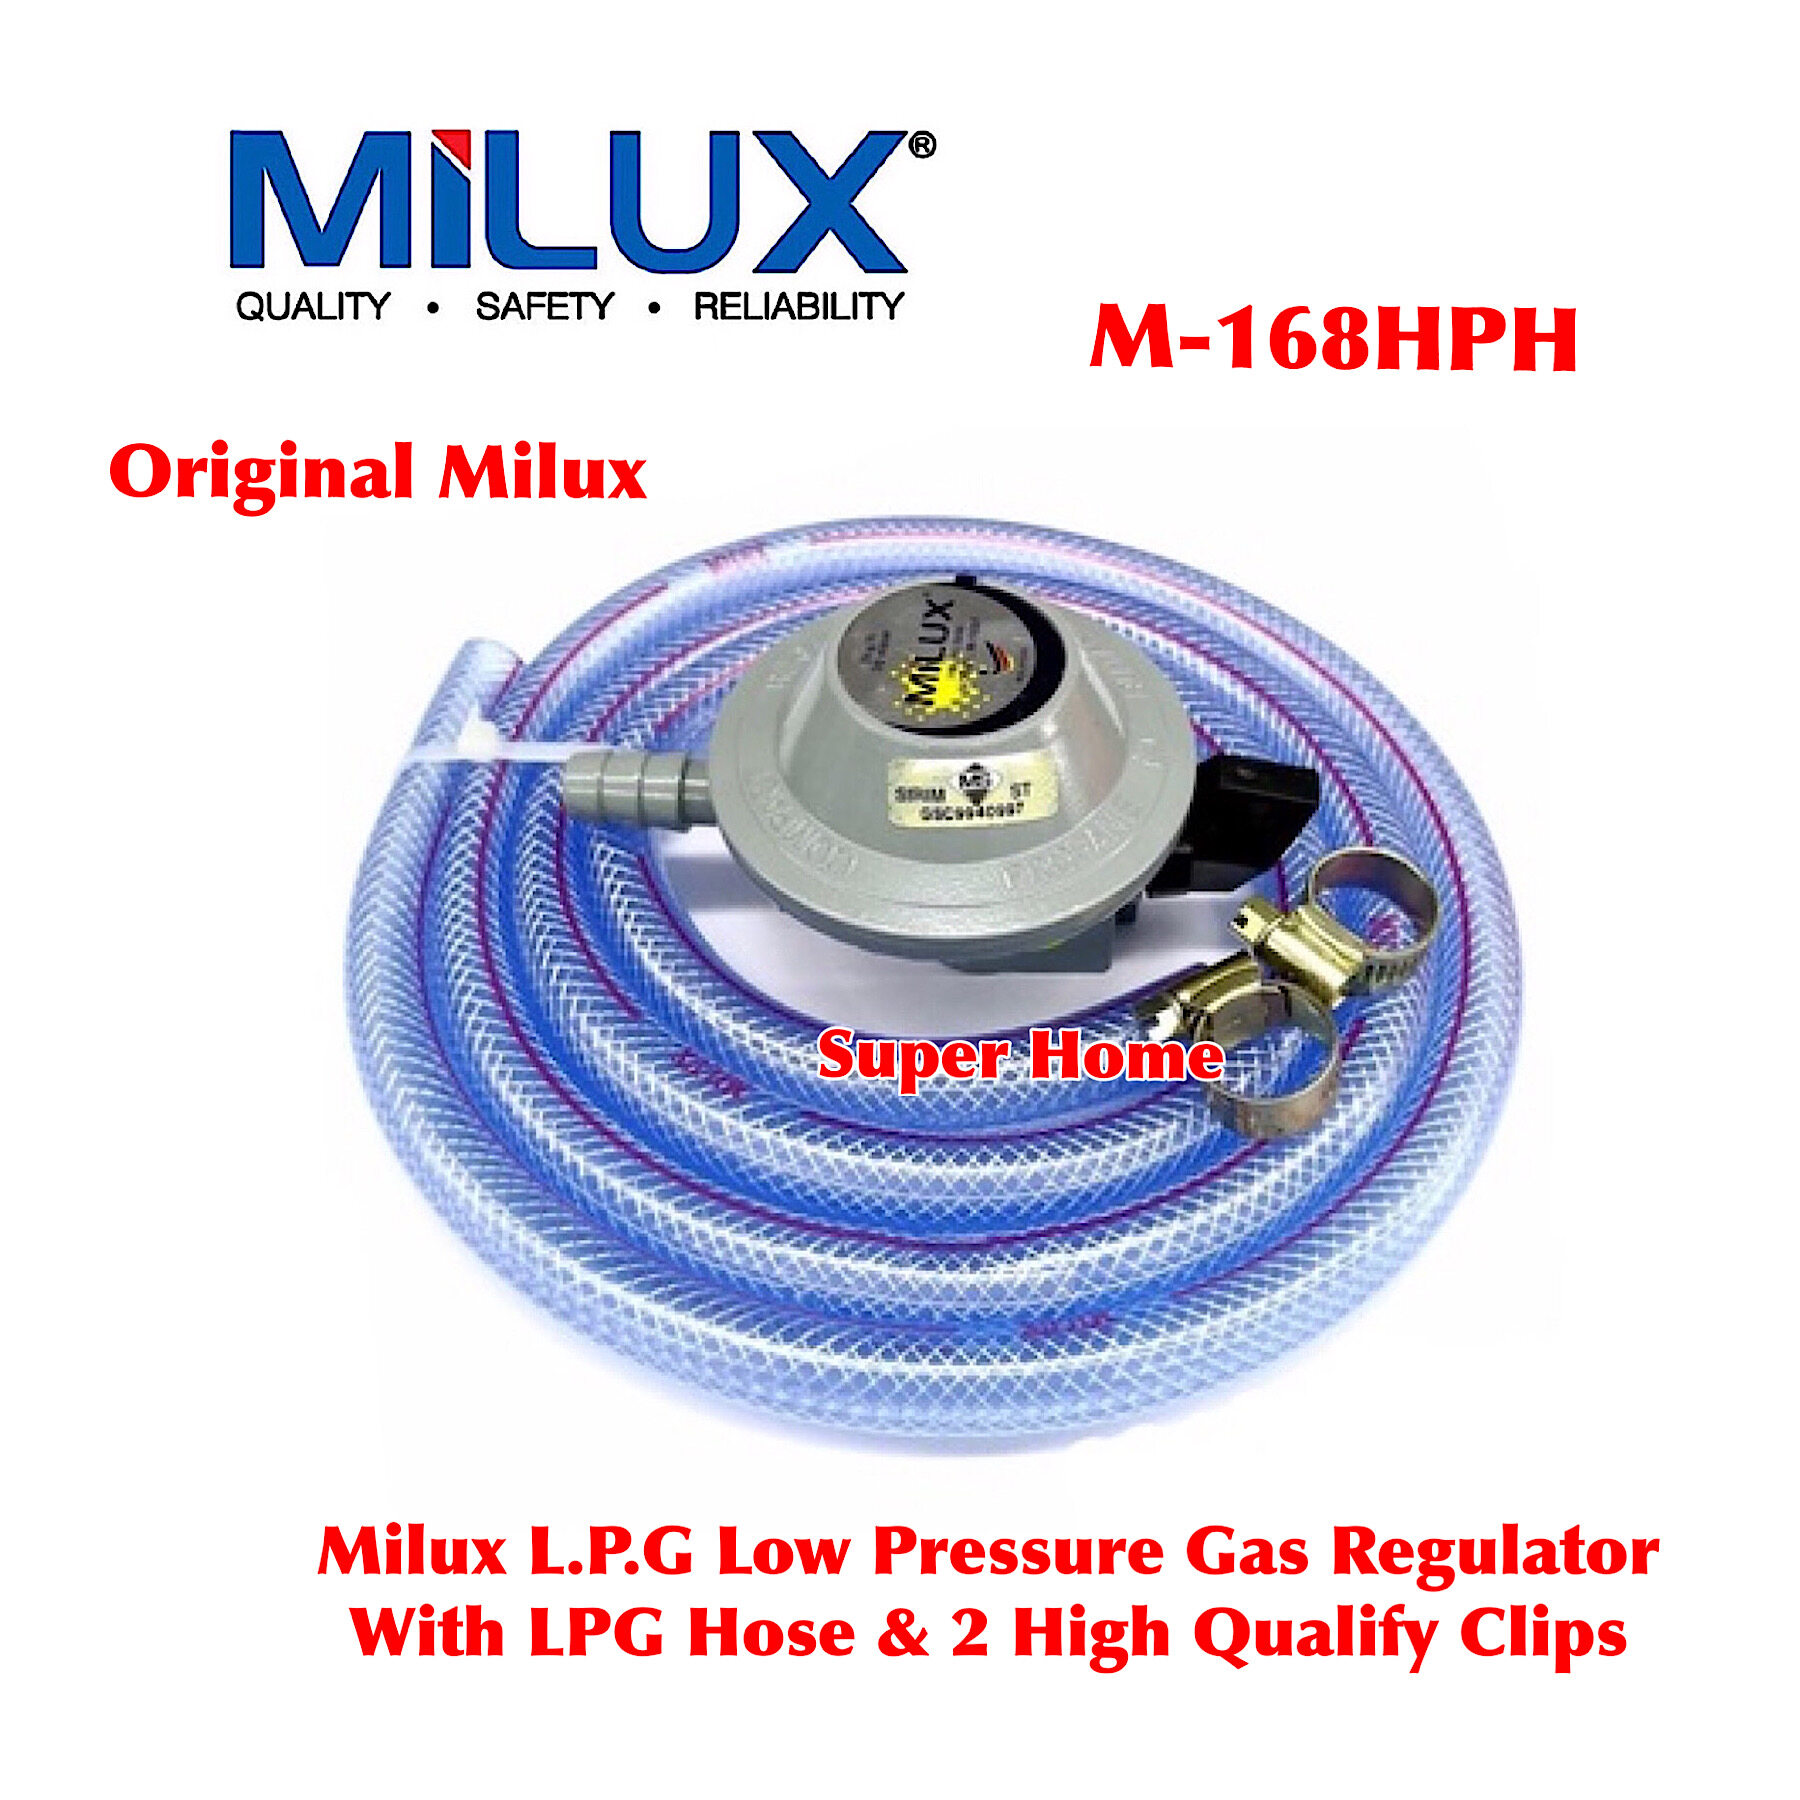 Milux L.P.G Low Pressure Gas Regulator M-168HPH With LPG Hose & 2 High Qualify Clips